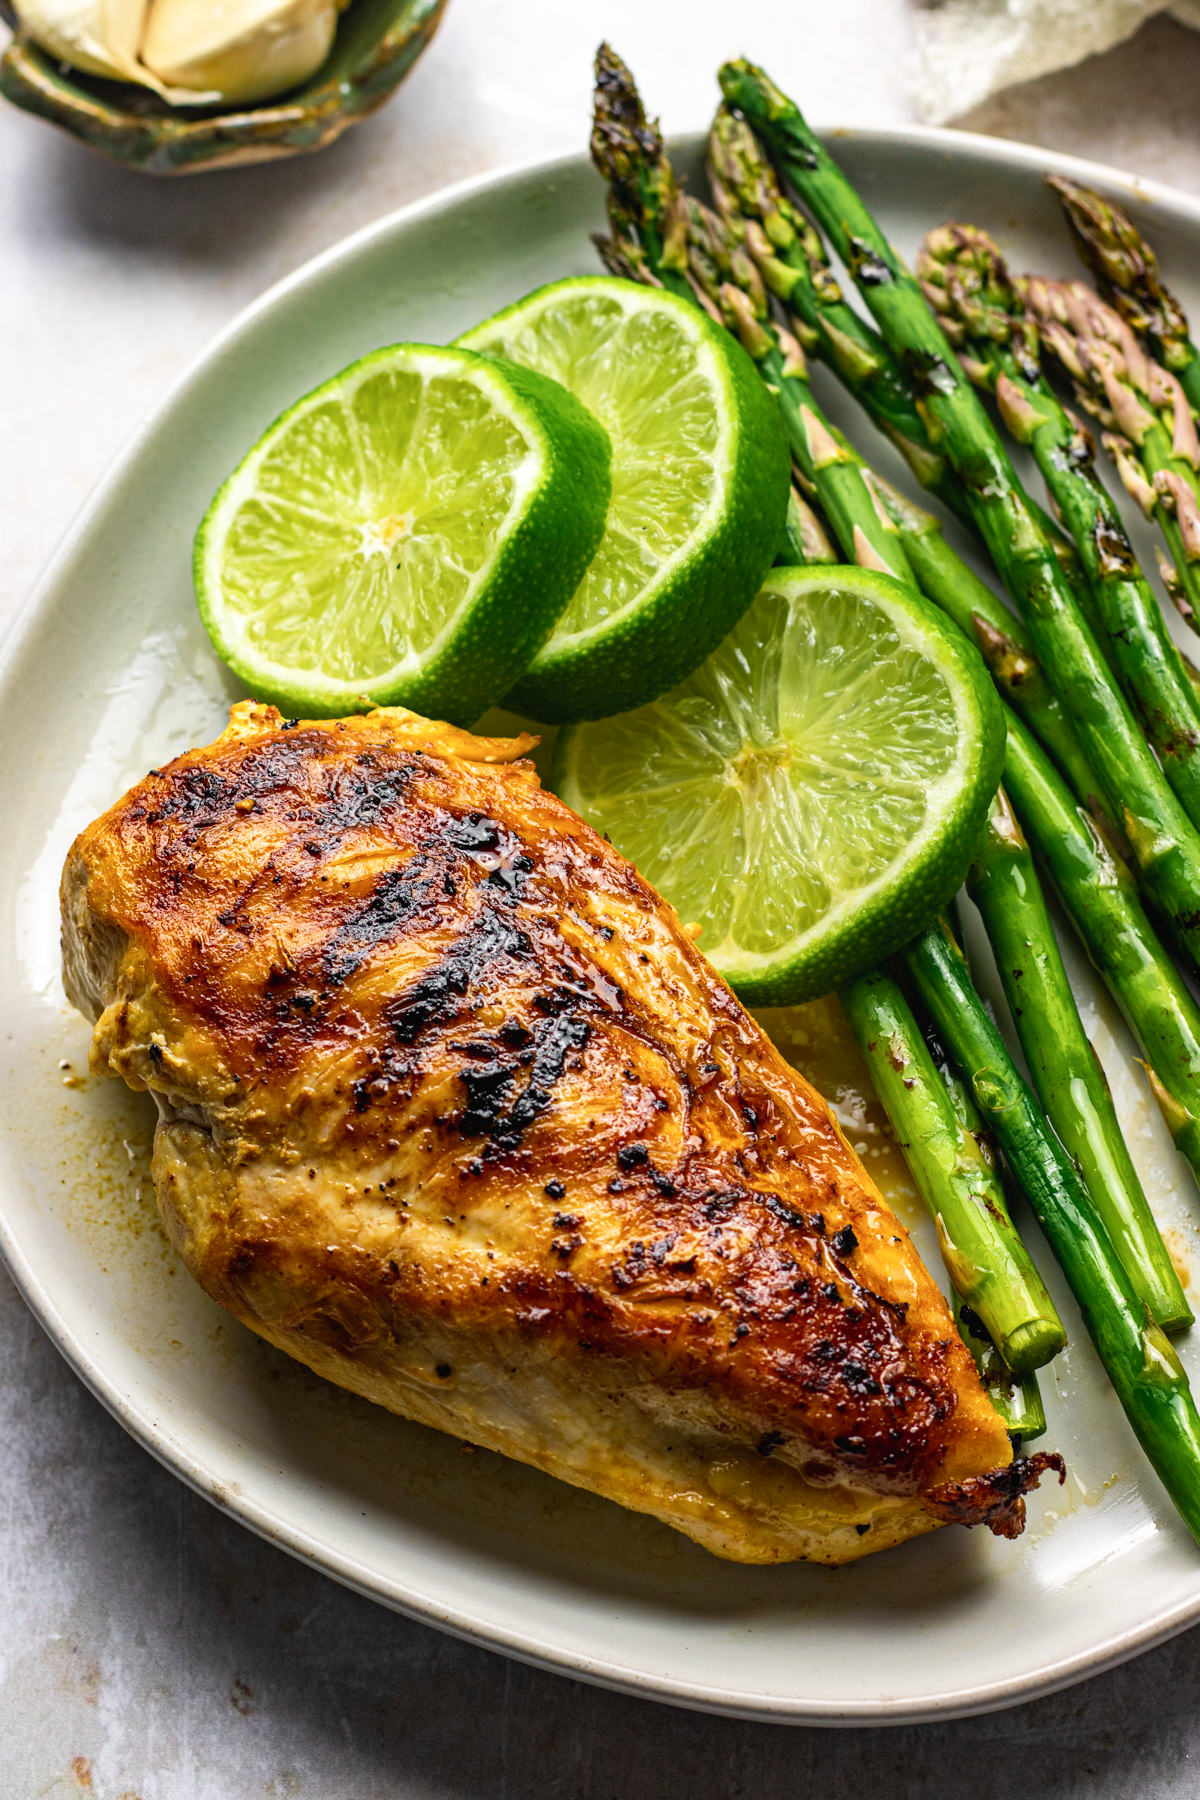 Grilled ginger lime chicken on a plate served asparagus and lime slices